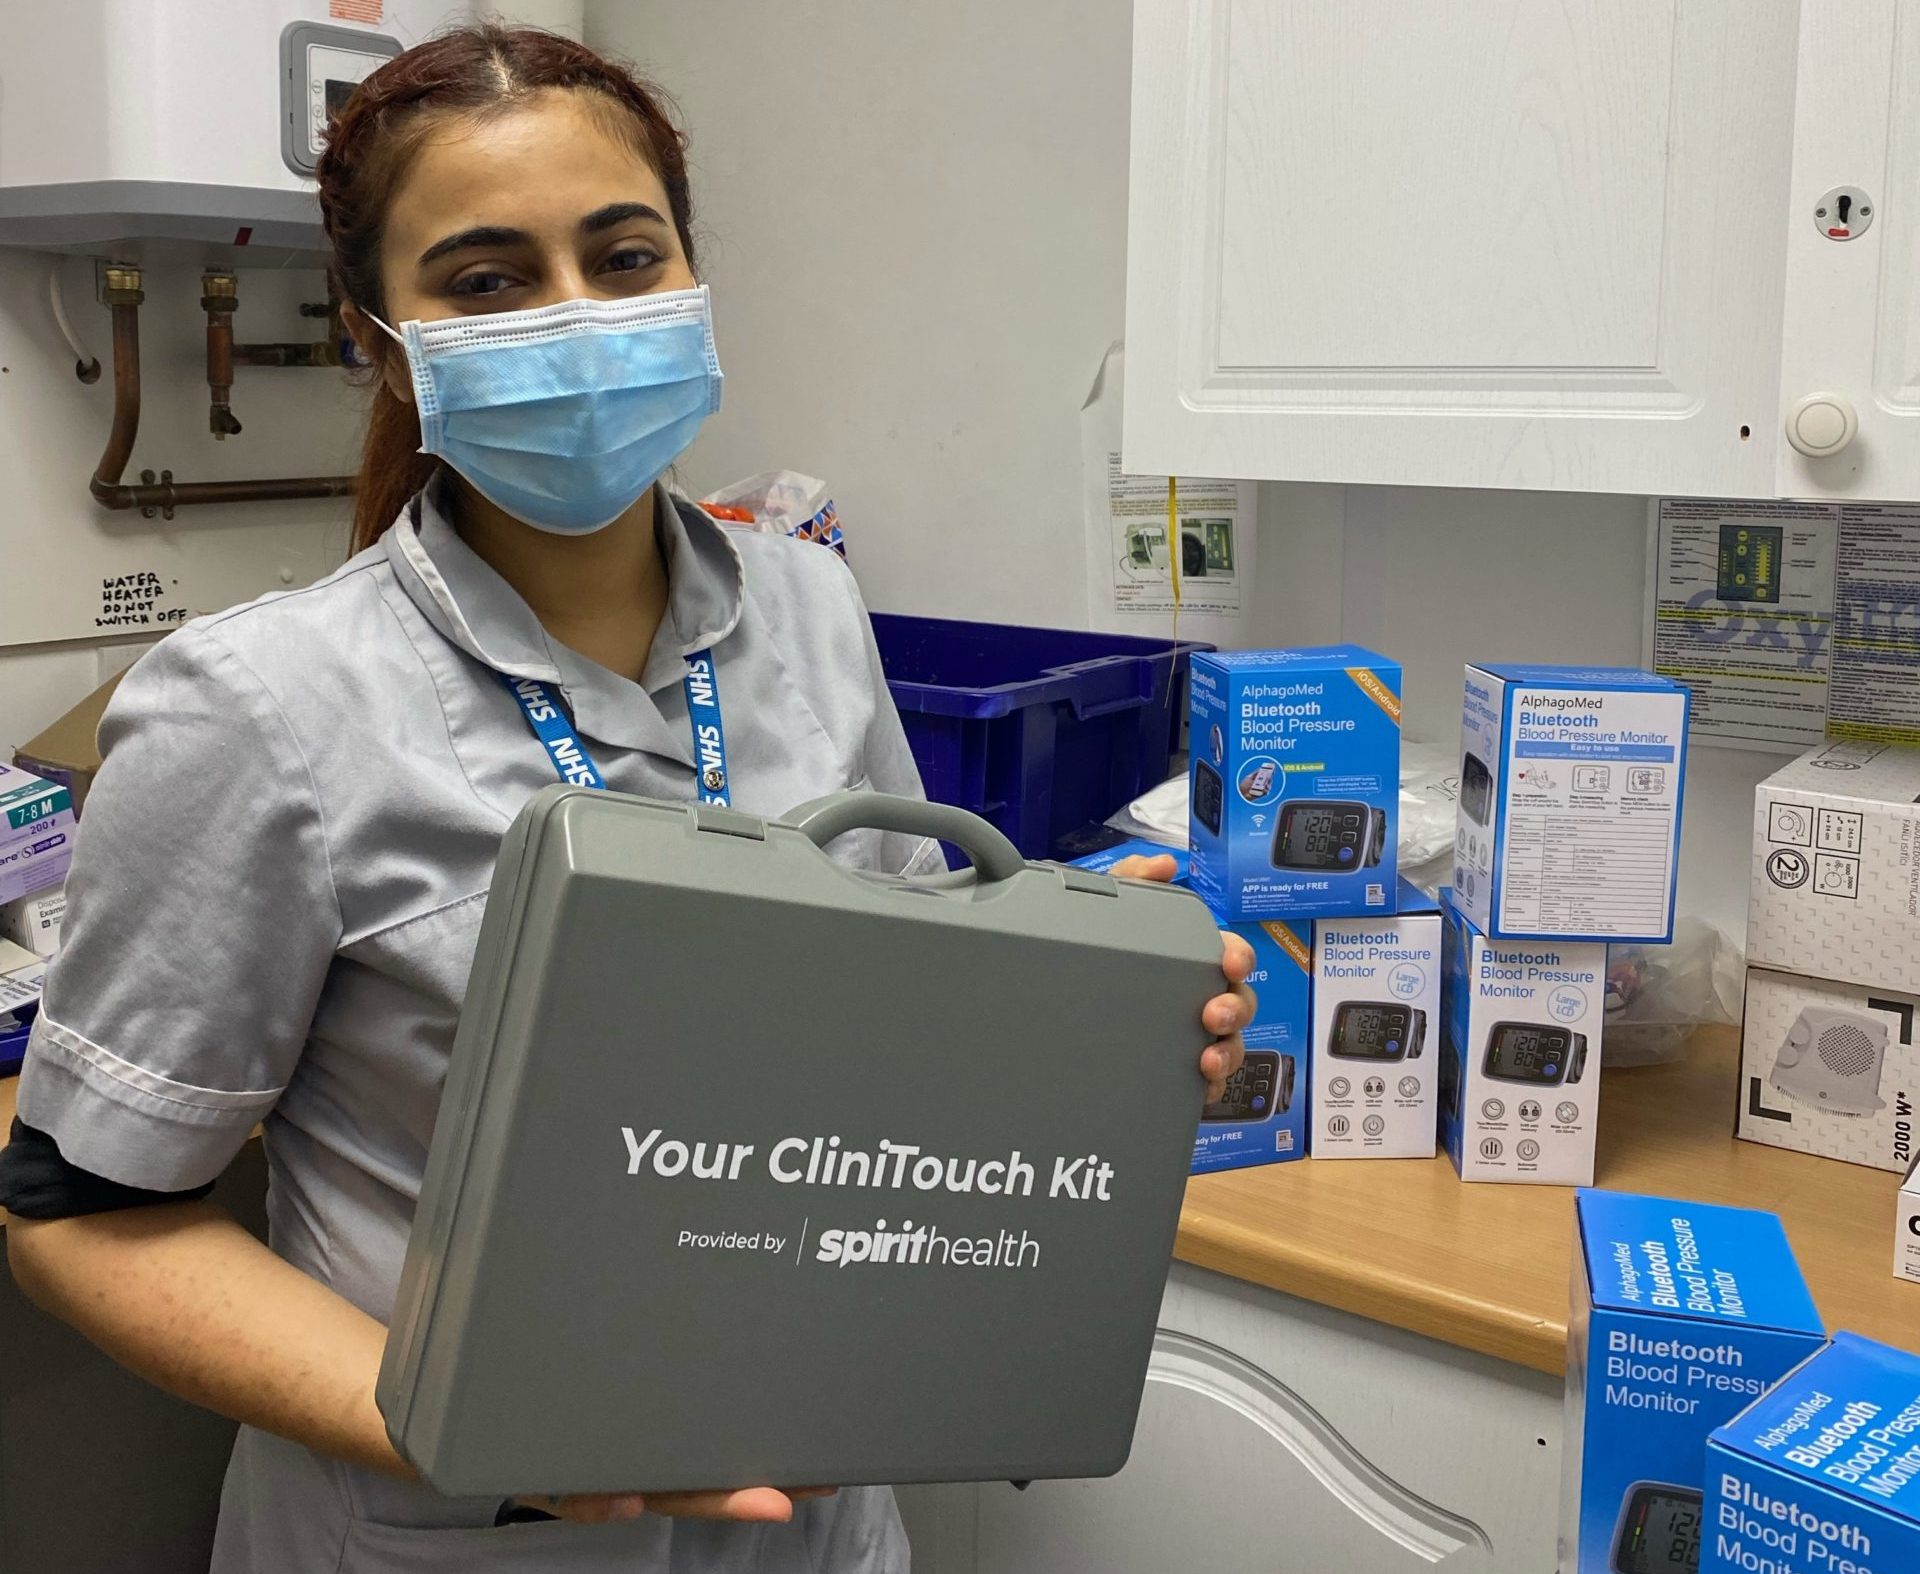 Healthcare professional holding a Clinitouch kit on the day of the asthma pathway launch. She is smiling and wearing a face mask